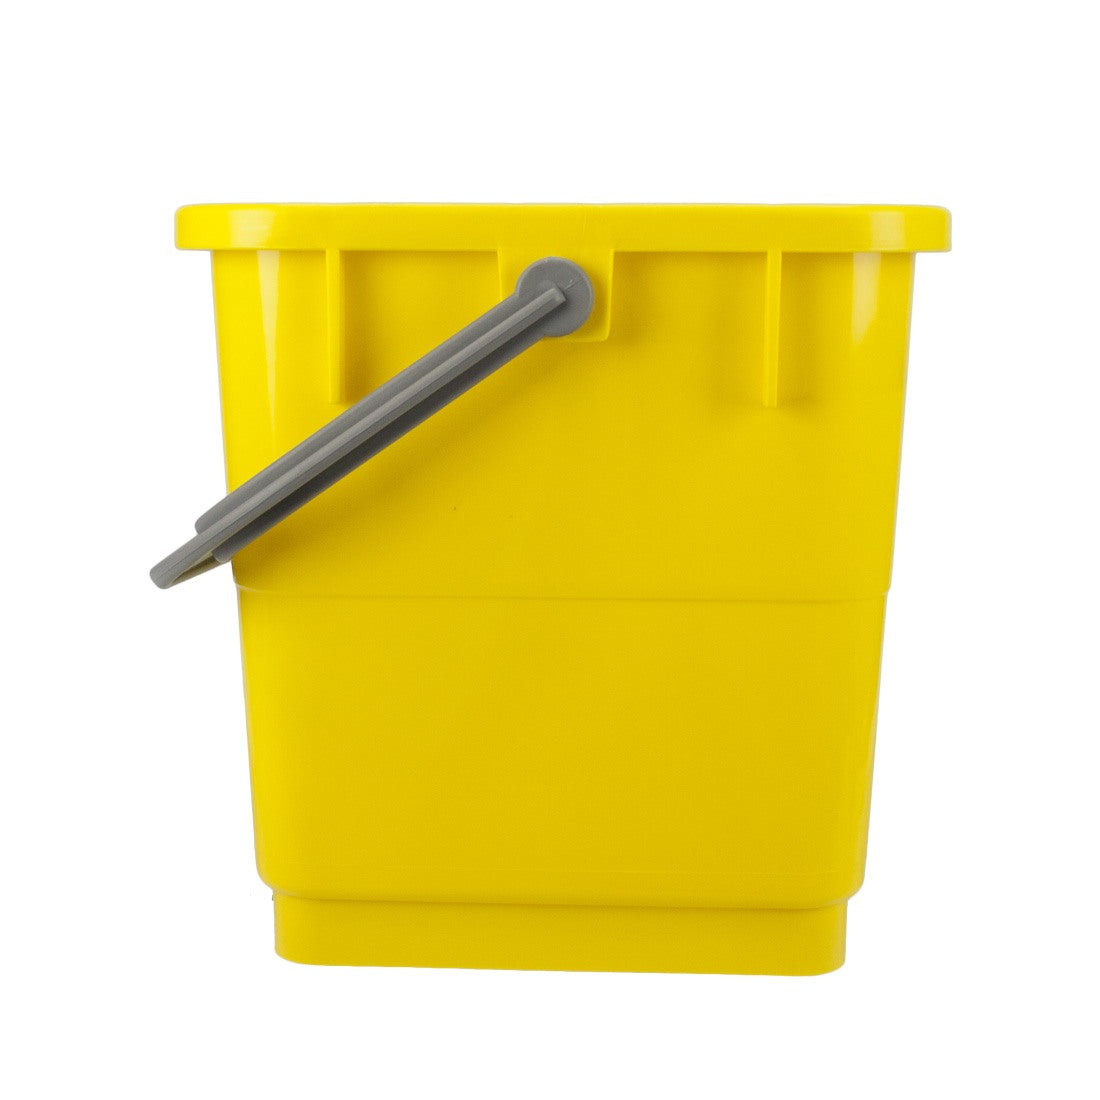 Sörbo Bucket with Clips for Squeegee and Washer for Leif Cart - 18 Inch - Right Side View